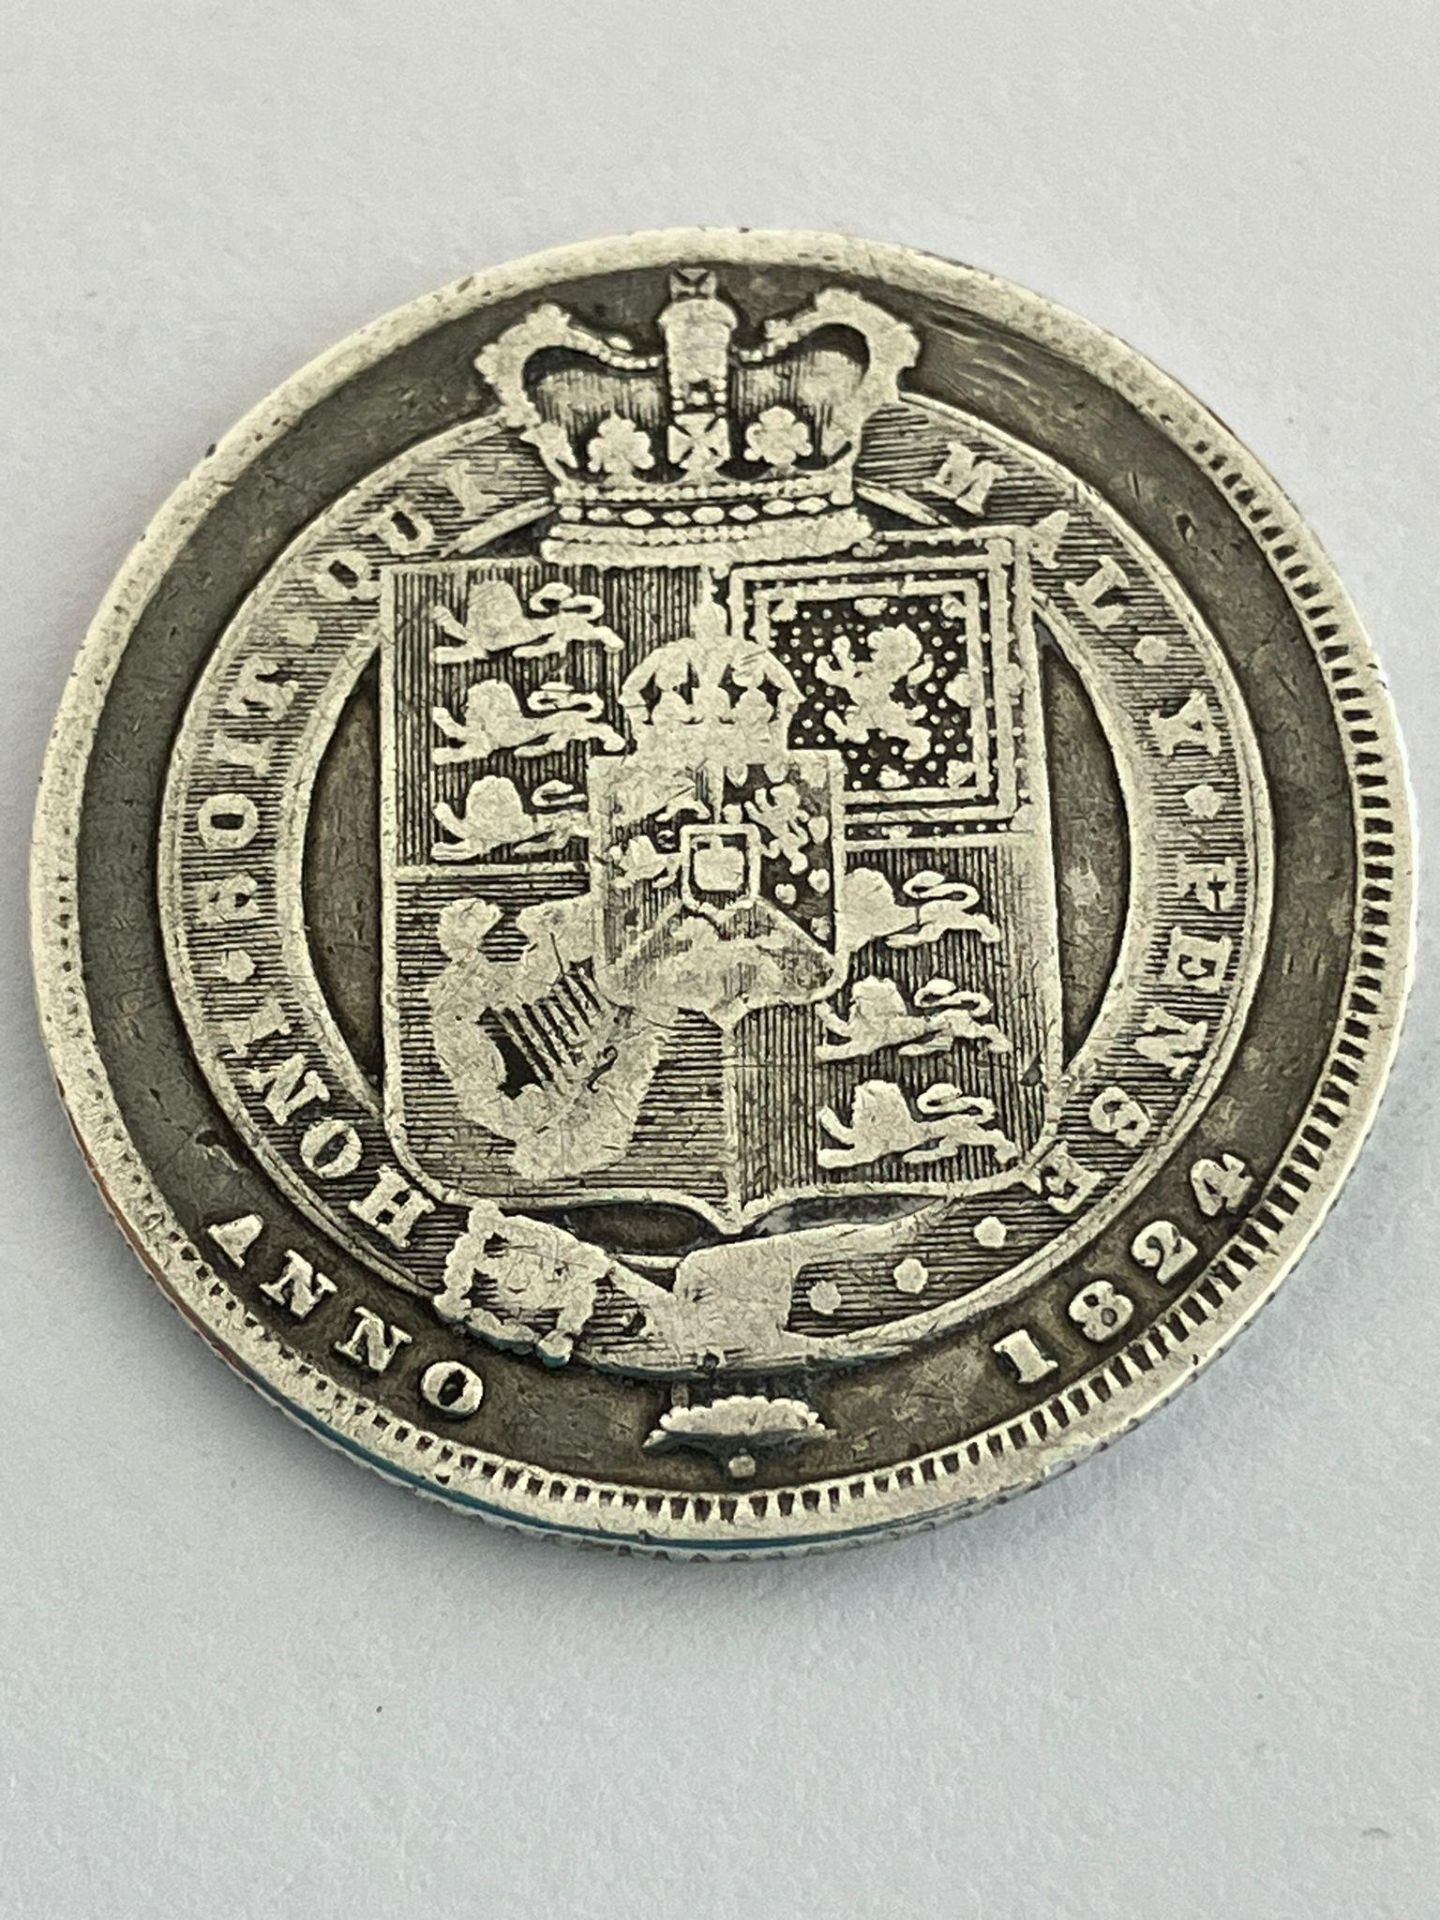 1824 GEORGE IV SILVER SHILLING. Overall condition fine or better, with clear detail to both sides. - Image 2 of 2